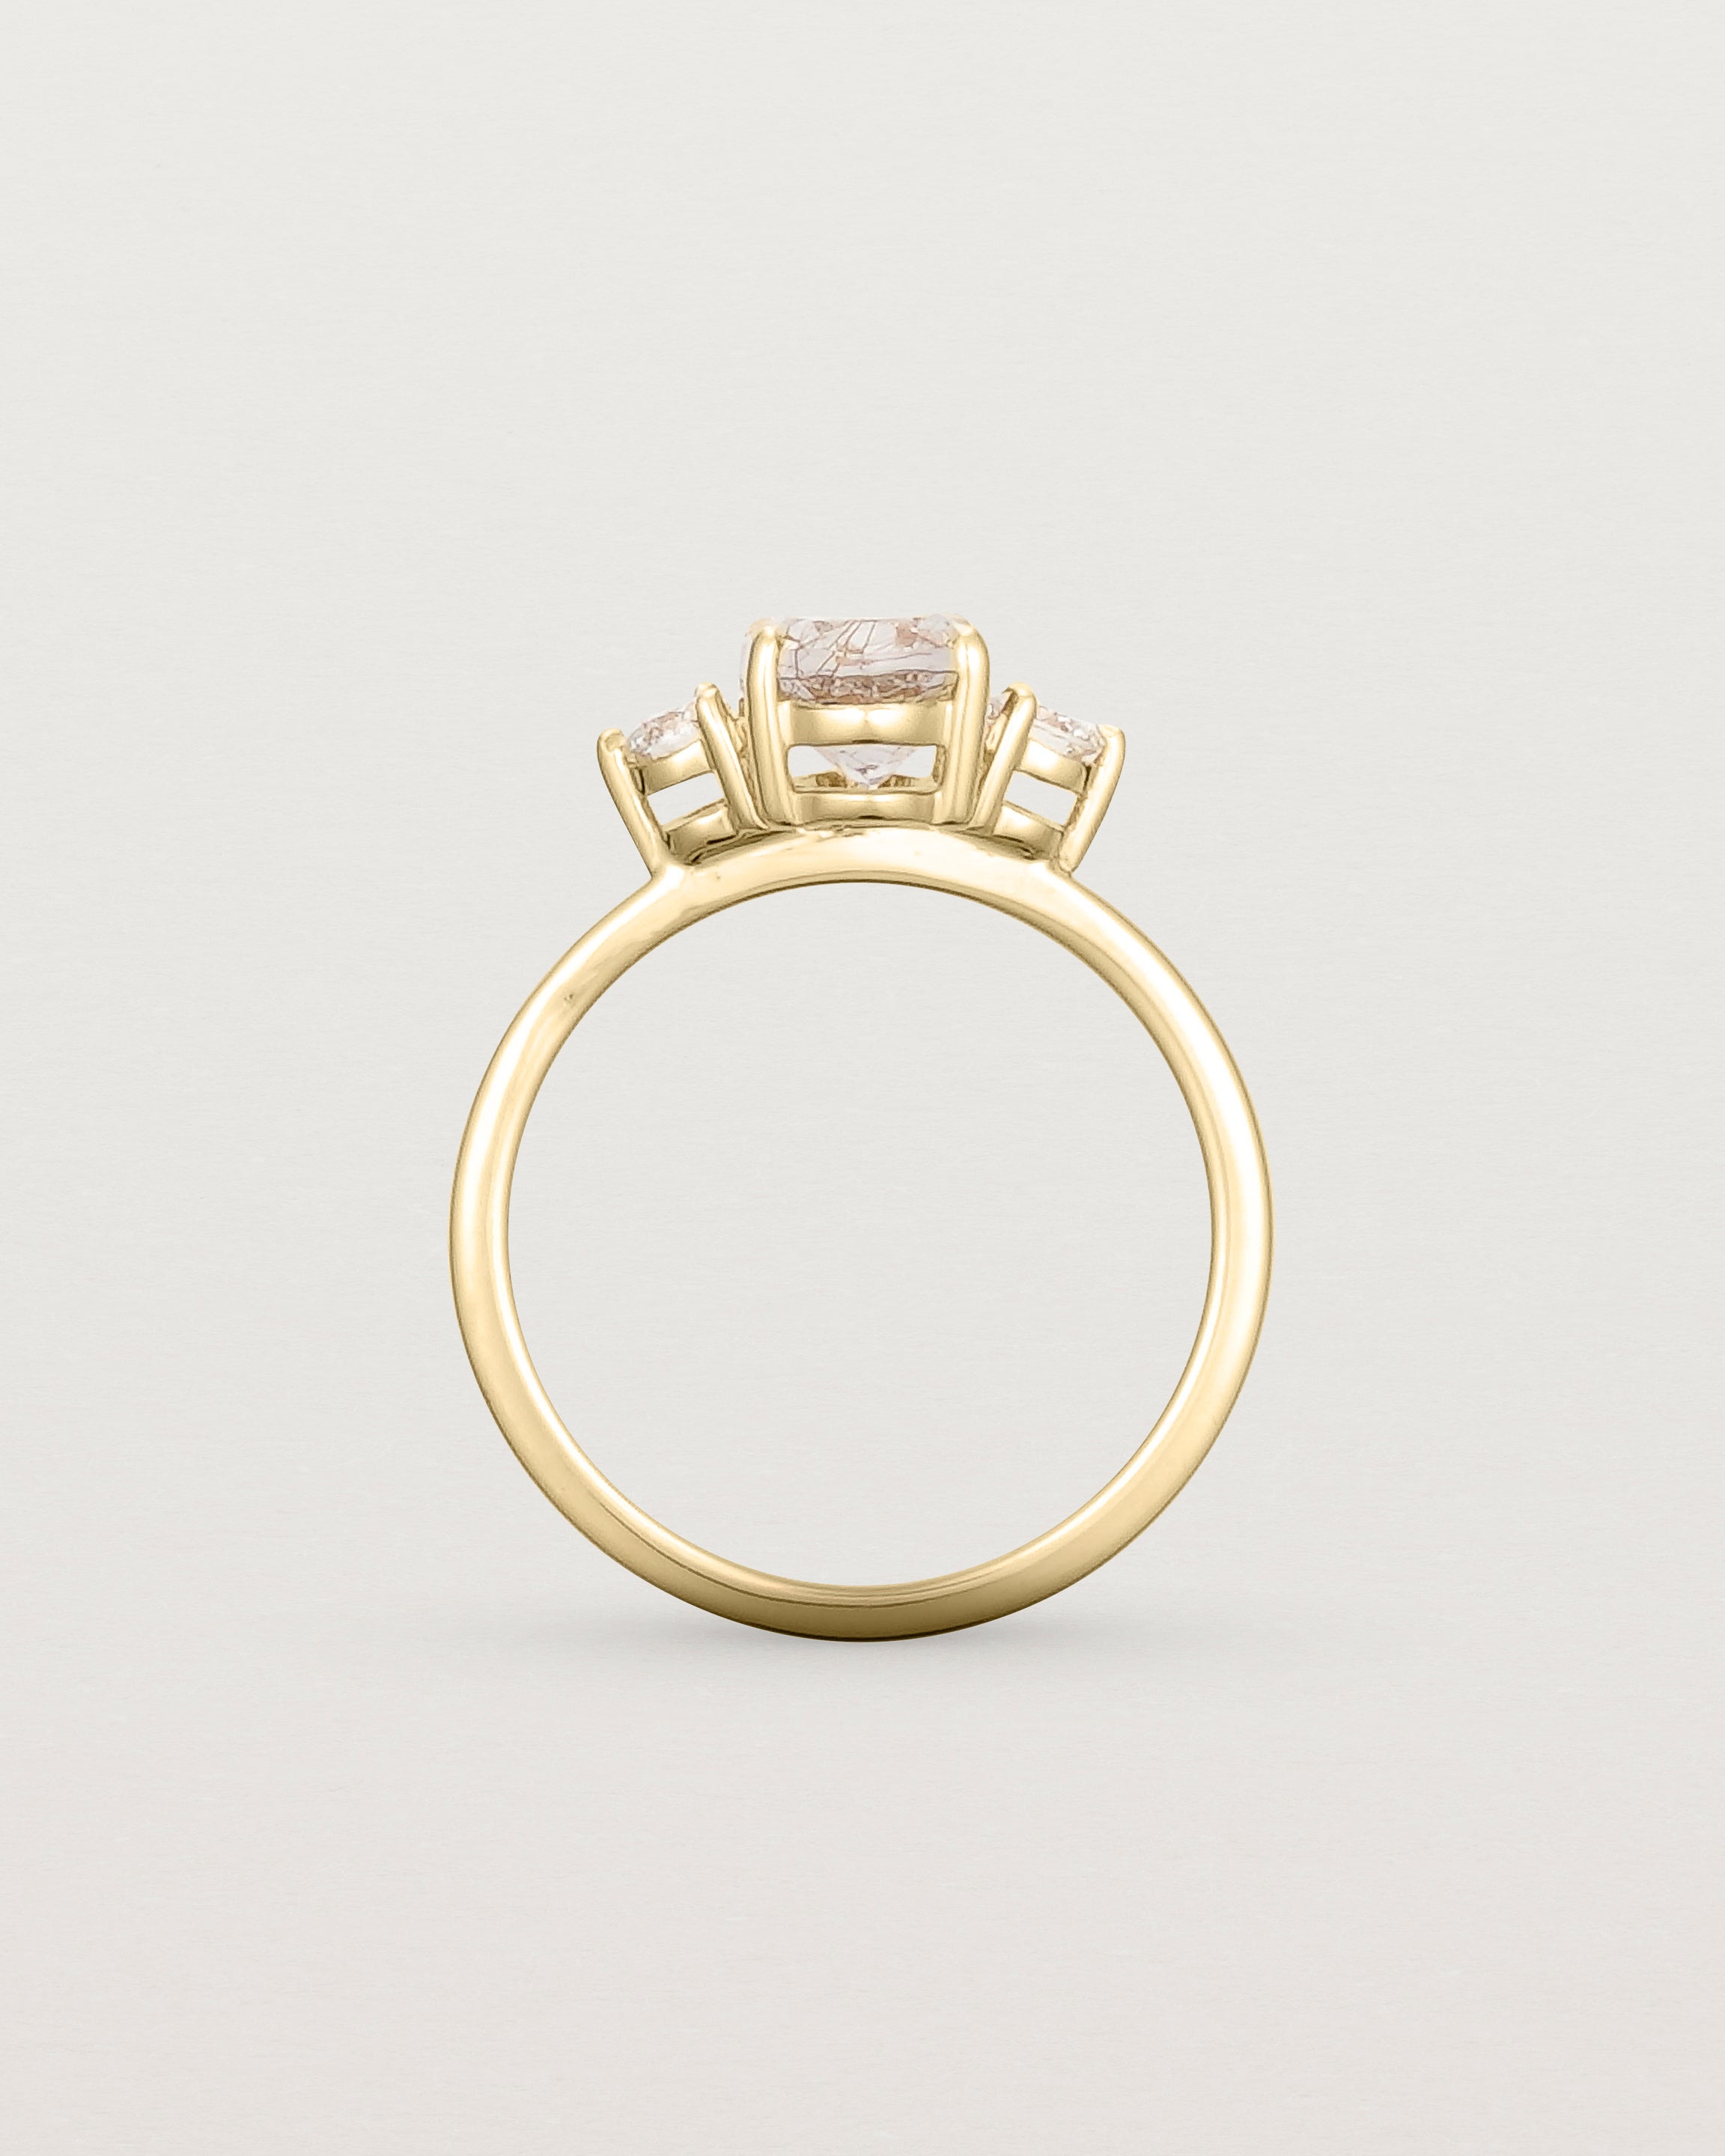 Standing view of the Una Oval Trio Ring | Rutilated Quartz & Diamonds | Yellow Gold.